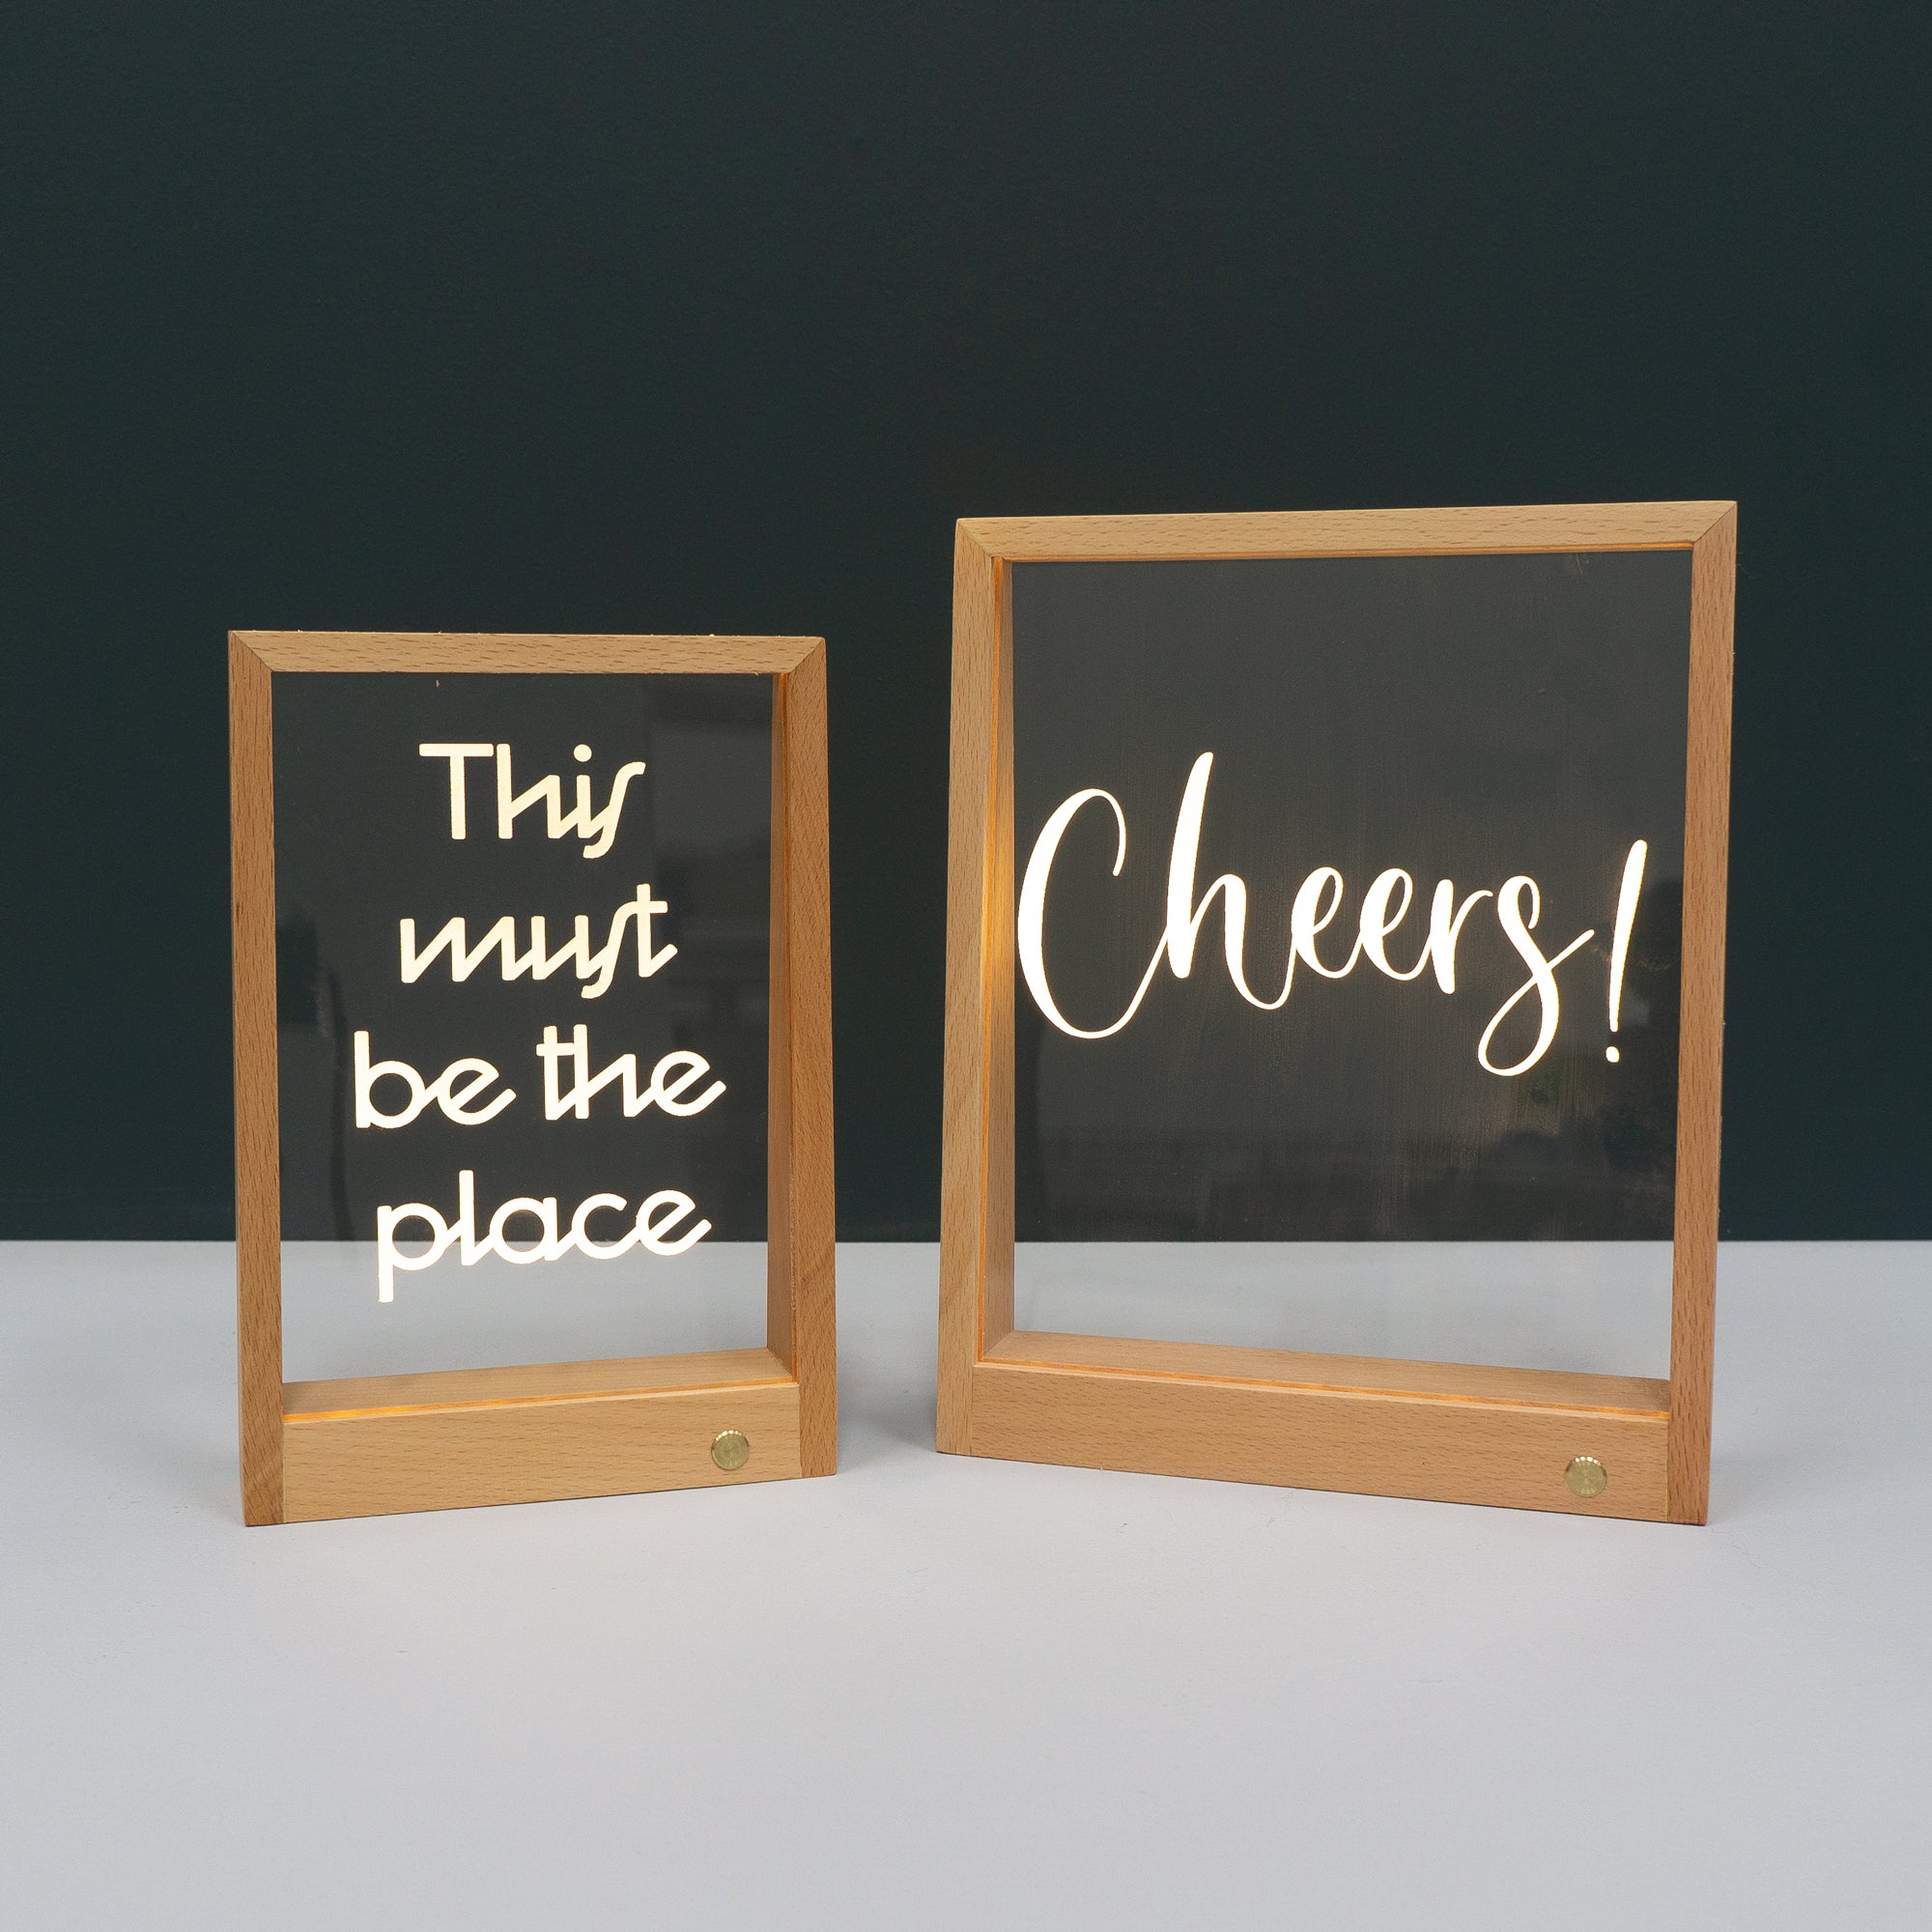 Wireless this must be the place light up LED quote sign